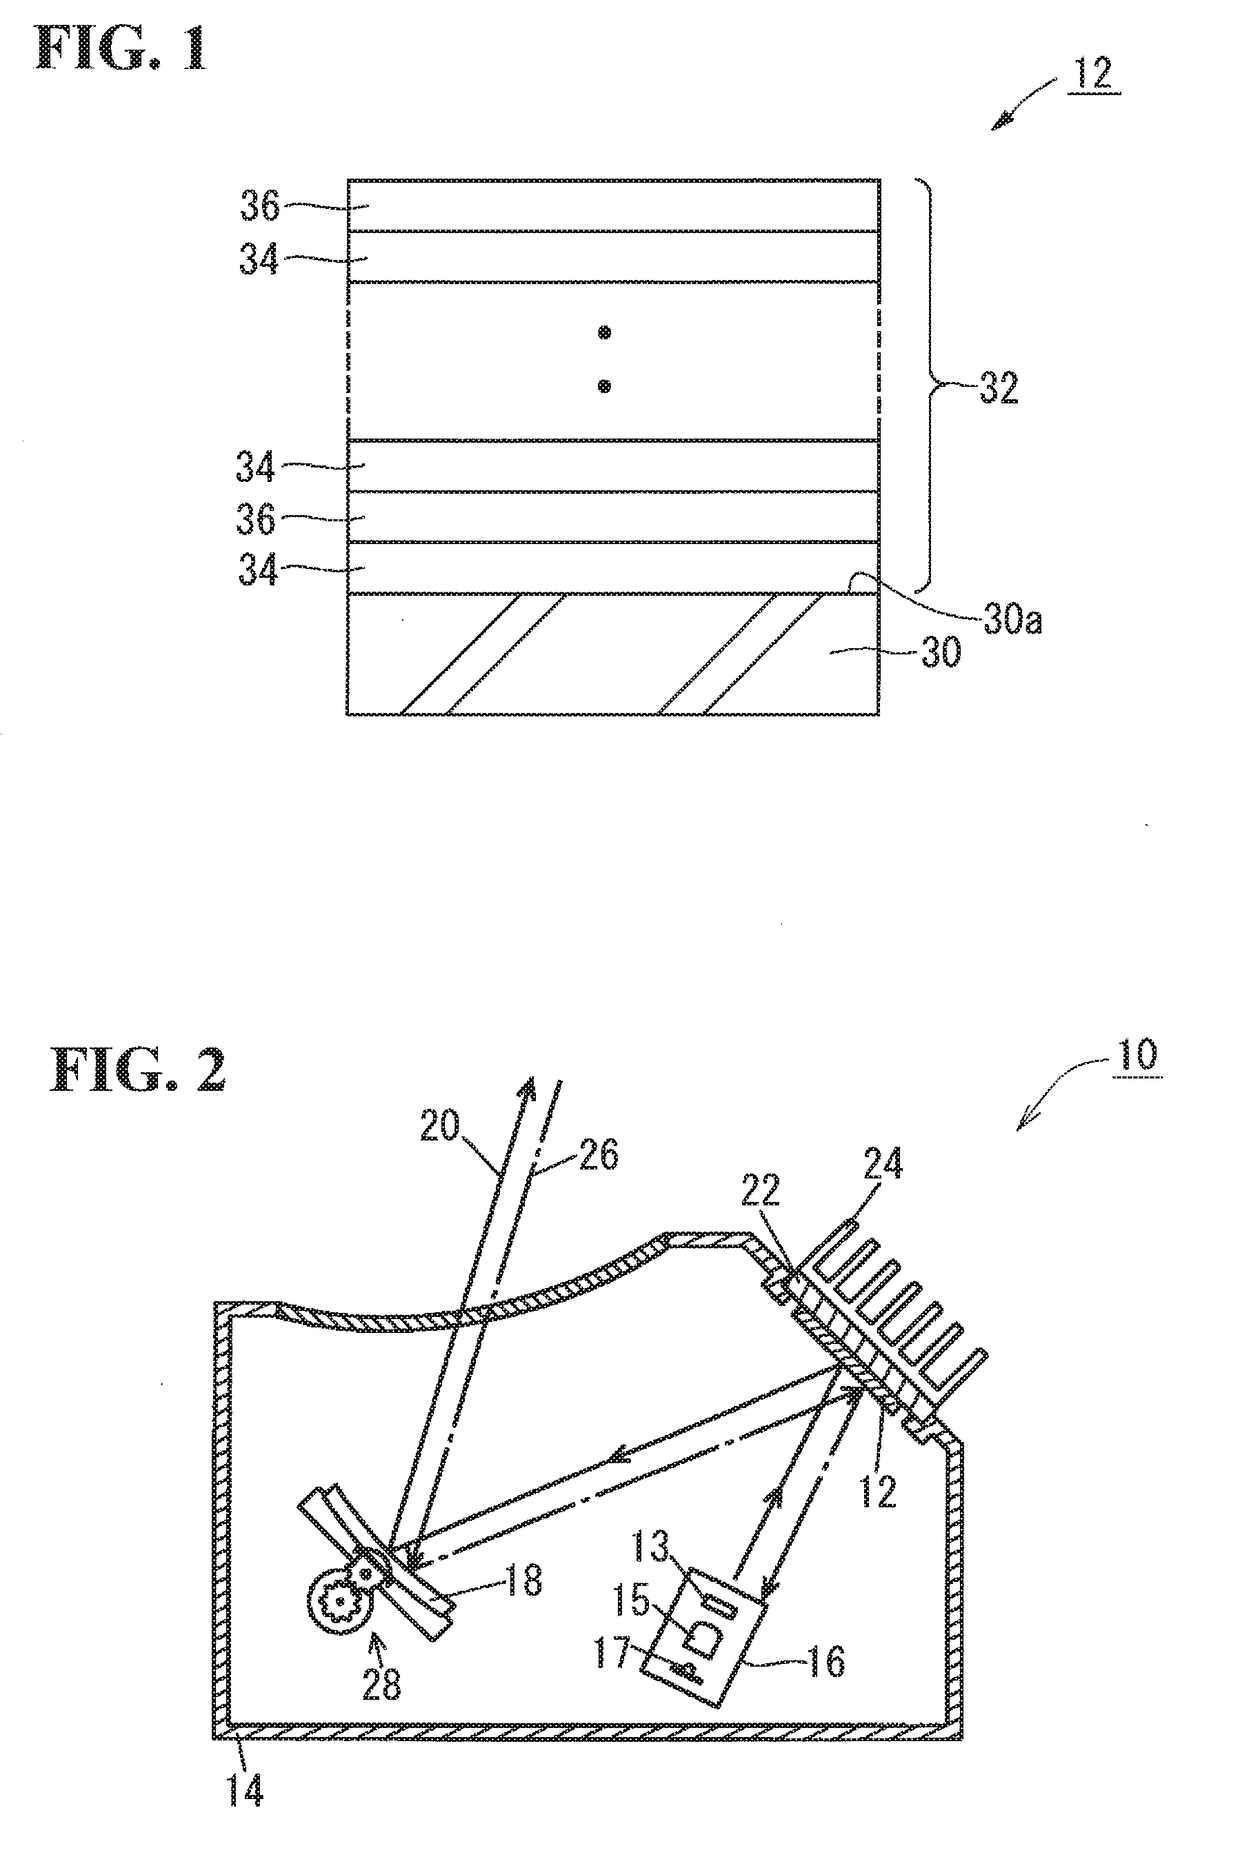 Cold mirror for head-up display apparatus and head-up display apparatus